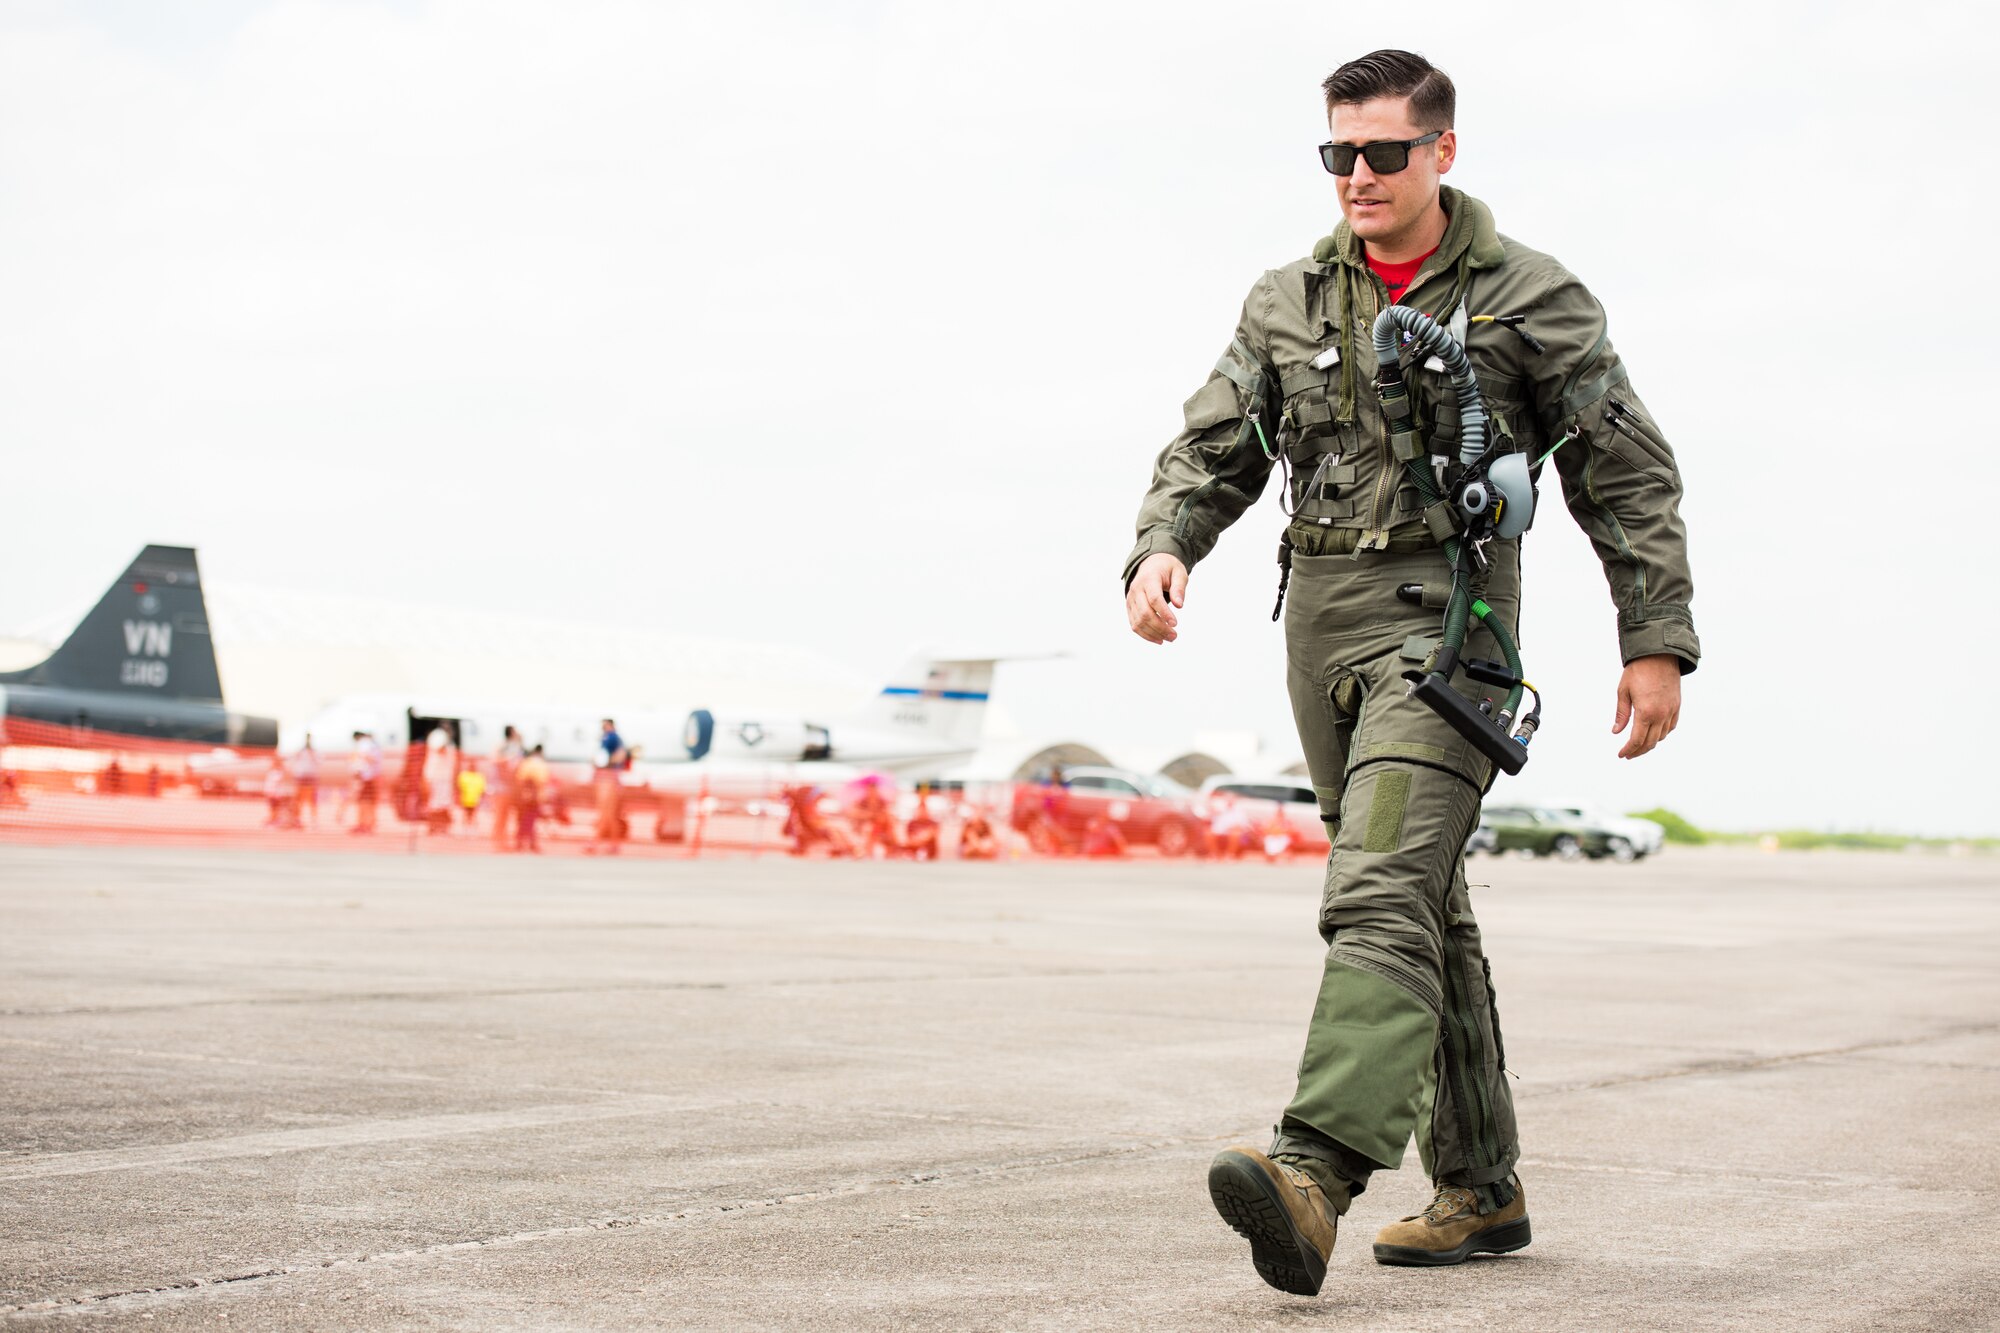 Capt. Andrew “Dojo” Olson, F-35 Heritage Flight Team pilot, steps to an F-35A Lightning II during the Wings Over South Texas air show at Naval Air Station Kingsville, Texas, March 24, 2018. Throughout the air show season, the F-35 HFT will perform at 13 air shows around the world. (U.S. Air Force photo by Airman 1st Class Alexander Cook)